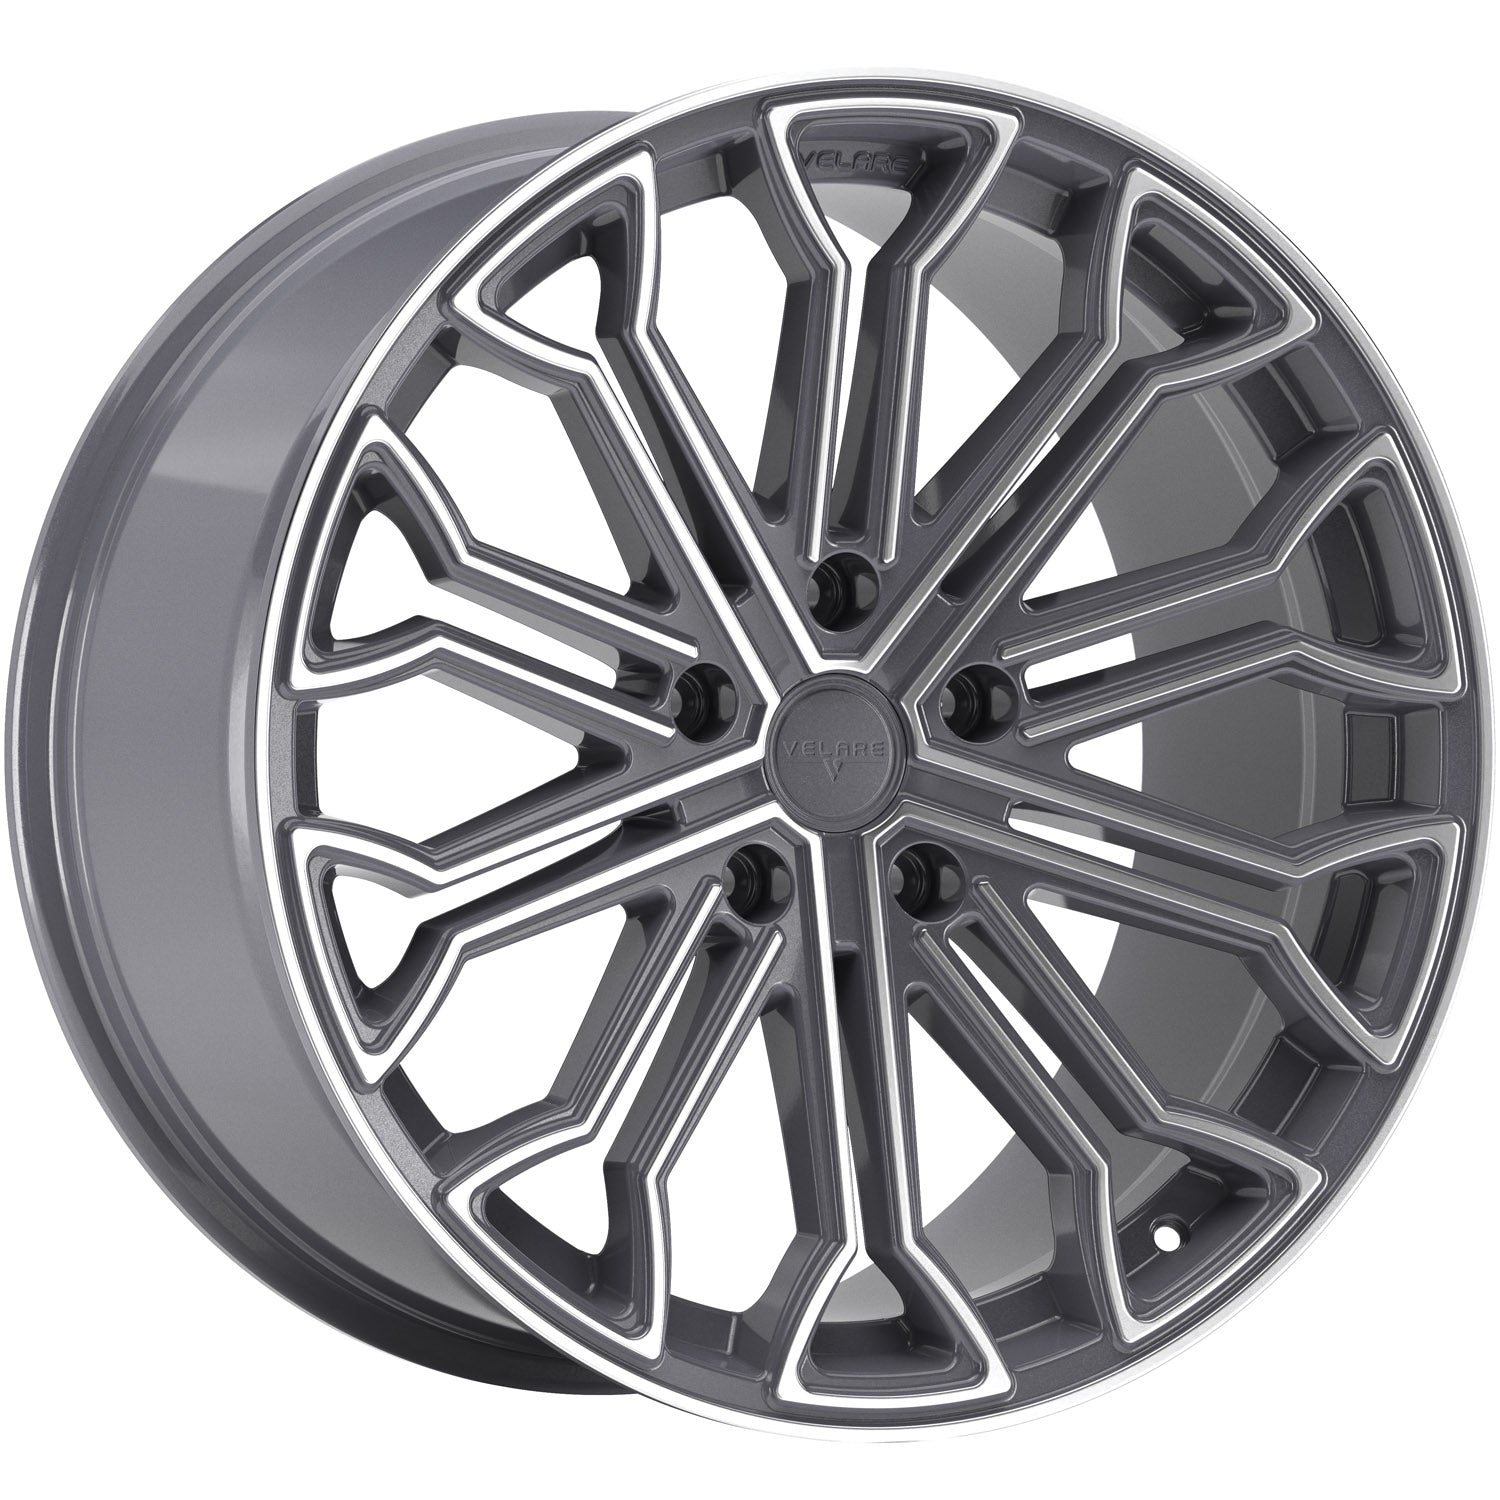 VLR04 Wheel and Tyre Package-Alloy wheels-Velare- DC Leisure